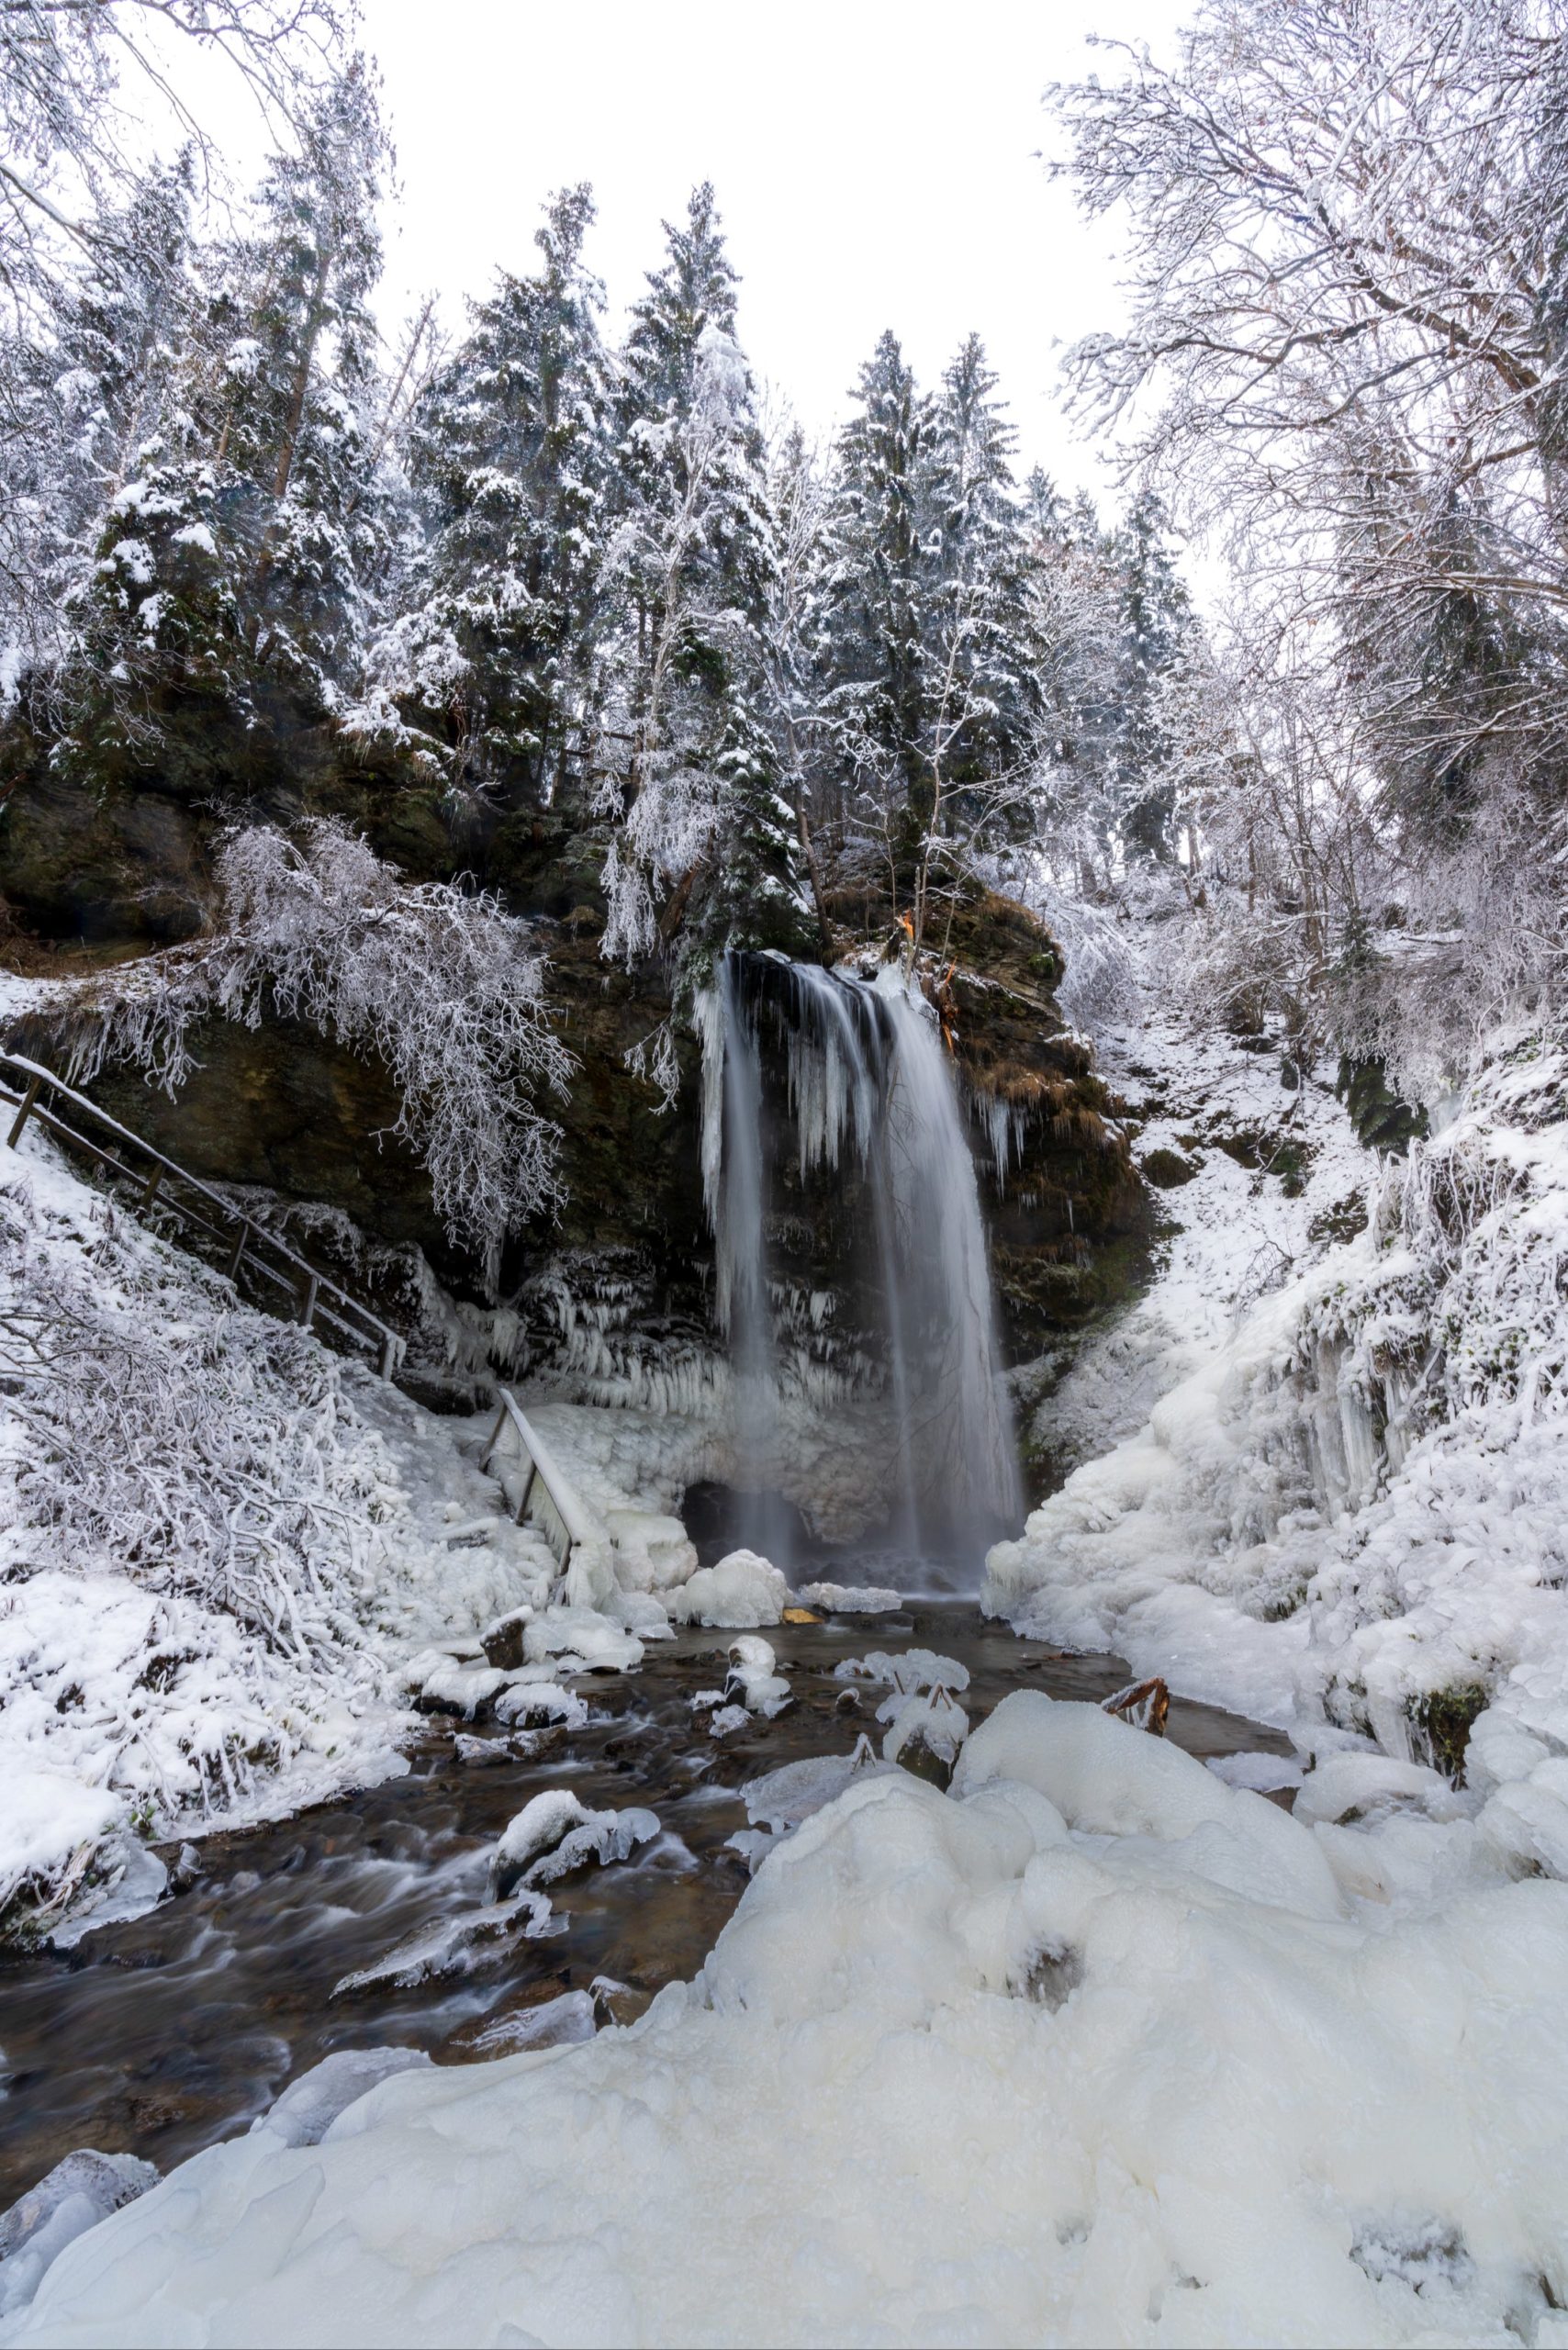 Sörger waterfall surrounded by snow and alien like ice structures in the middle of winter, Carinthia, Austria